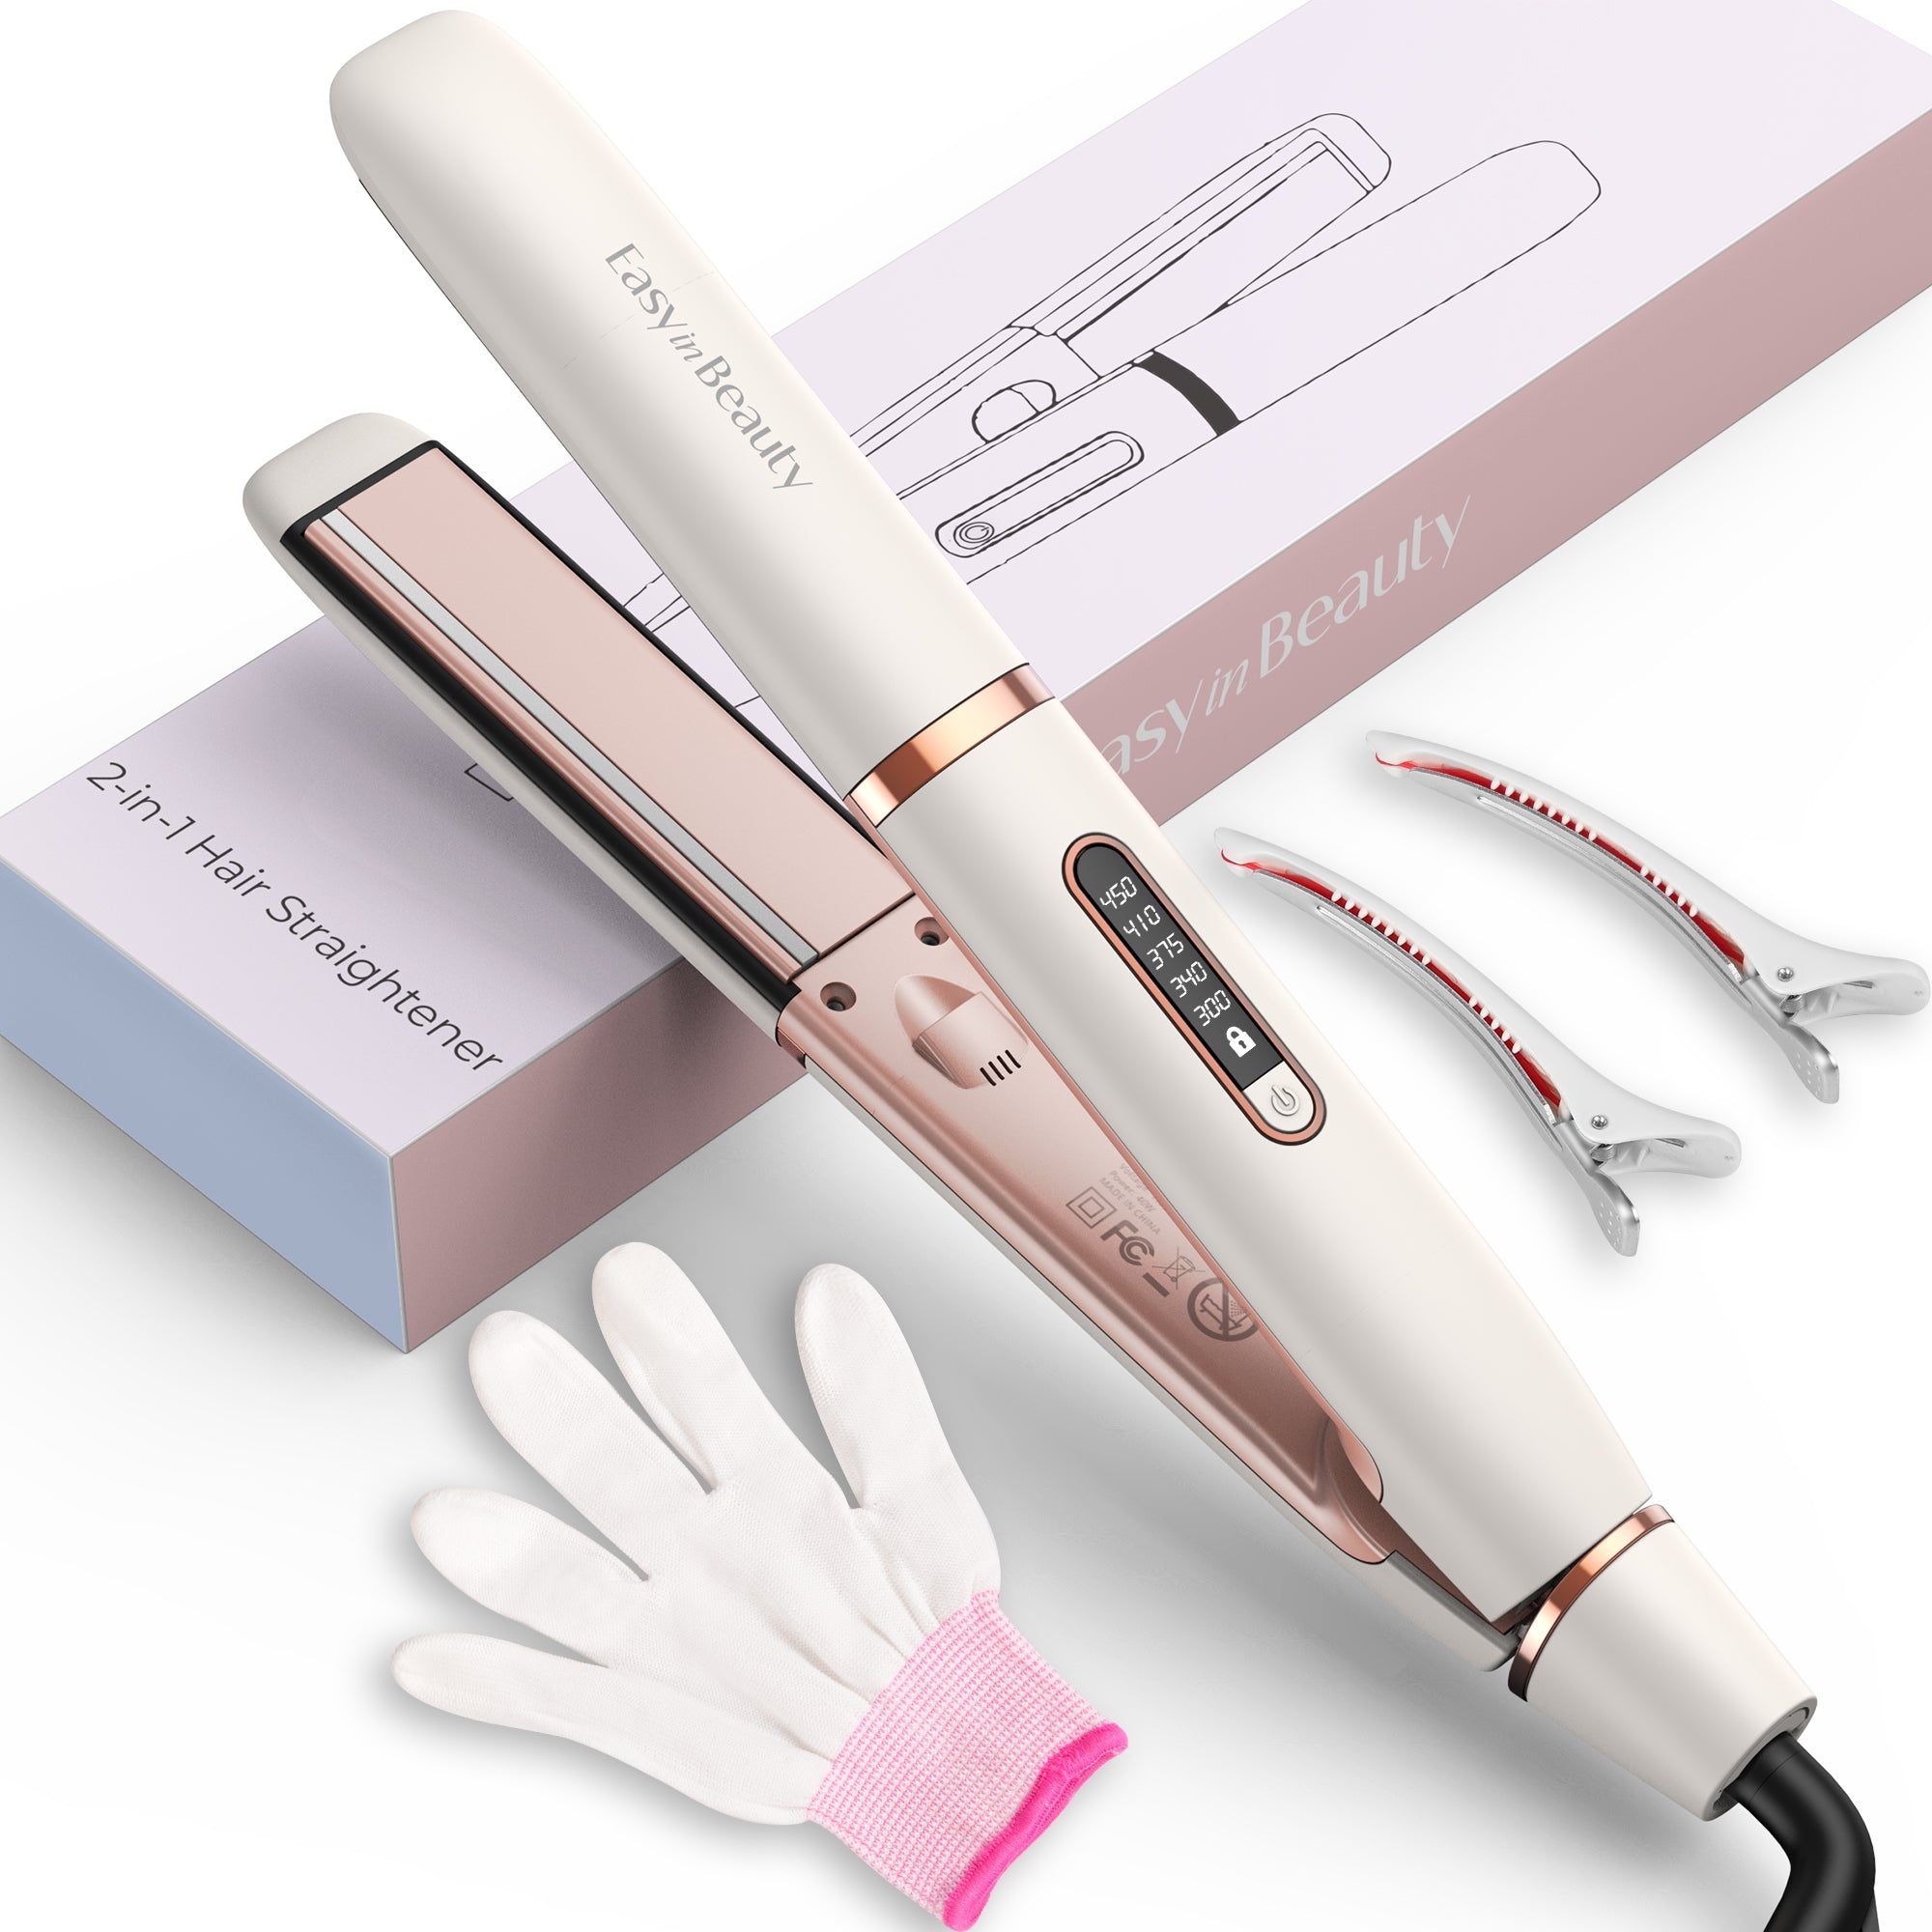 2-in-1 Hair Straightener and Curler